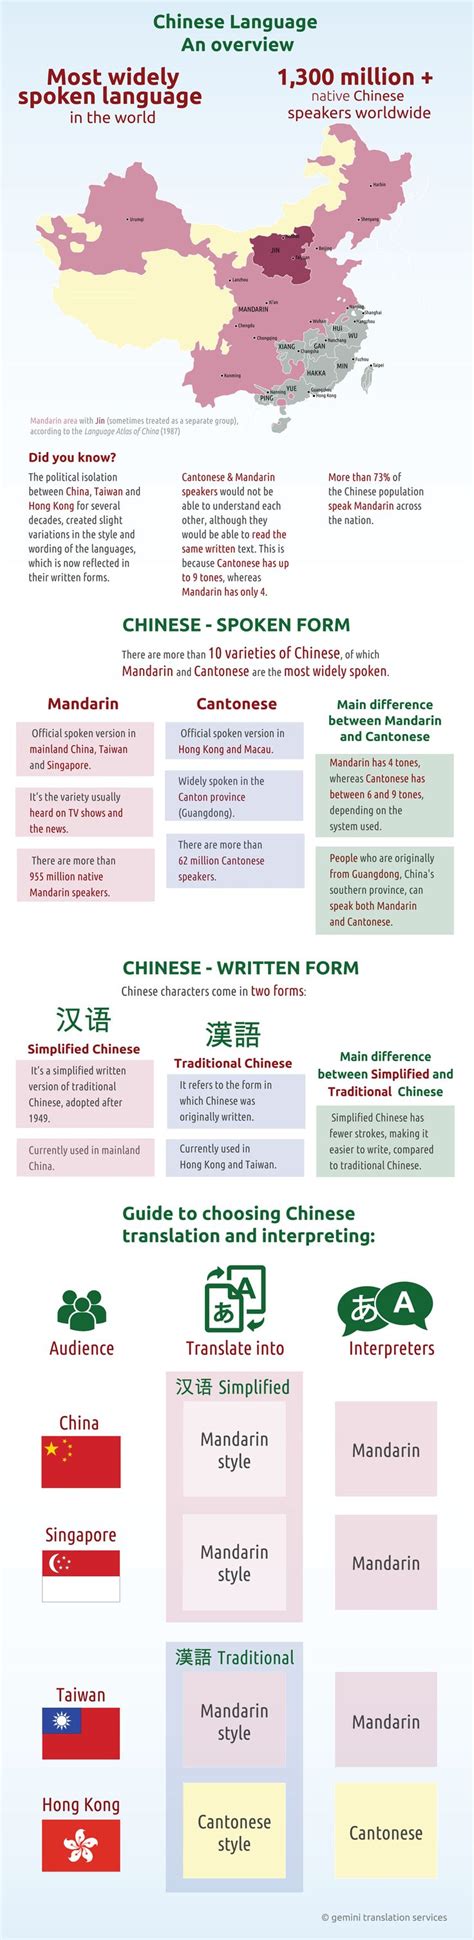 In the chinese language, the chinese words for older sister/brother and younger sister/brother are completely different in pronunciation and writing: Written & spoken Chinese language infographic. Use of ...